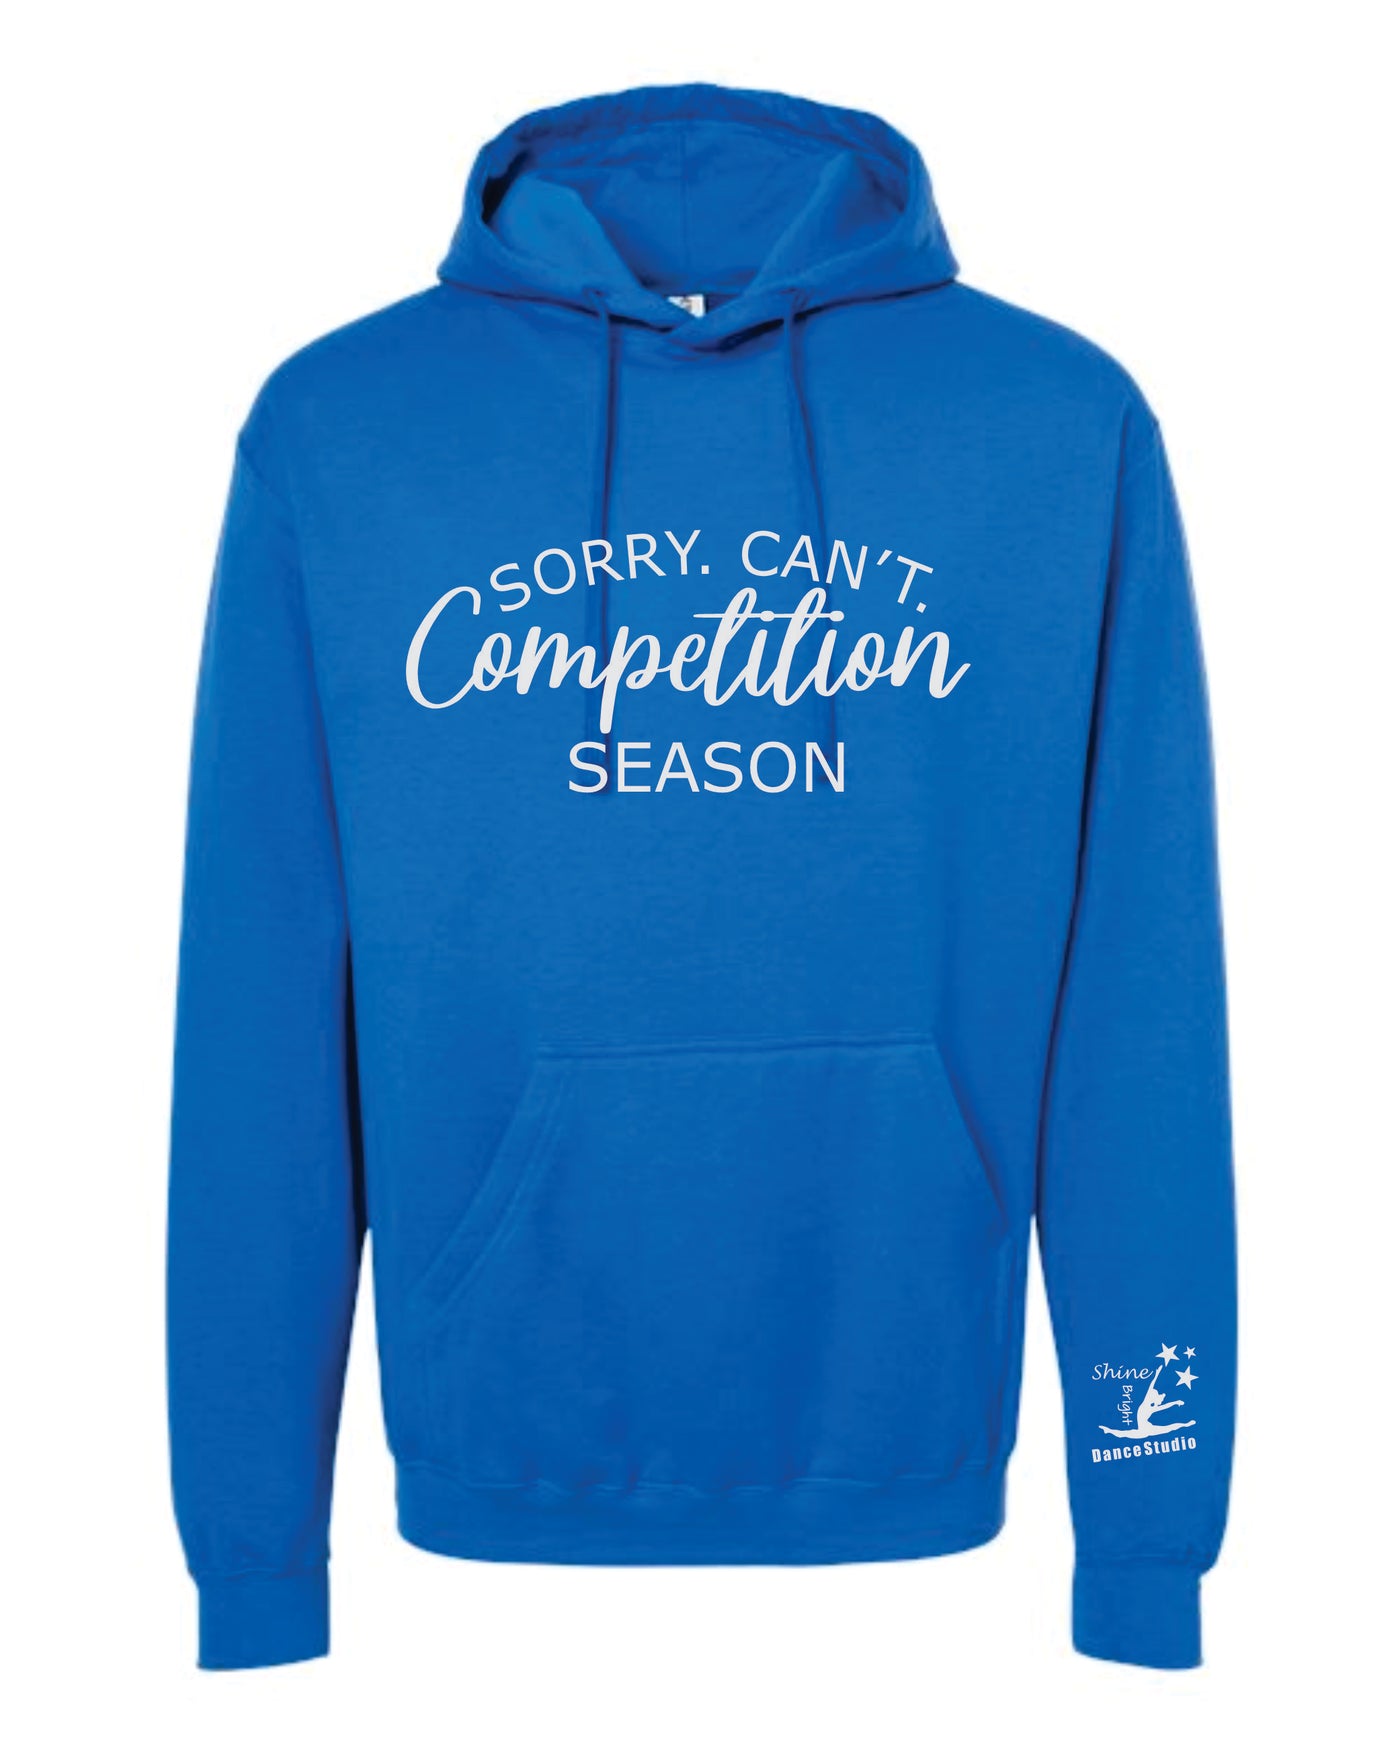 Sorry. Can't. Competition Season Hooded Sweatshirt